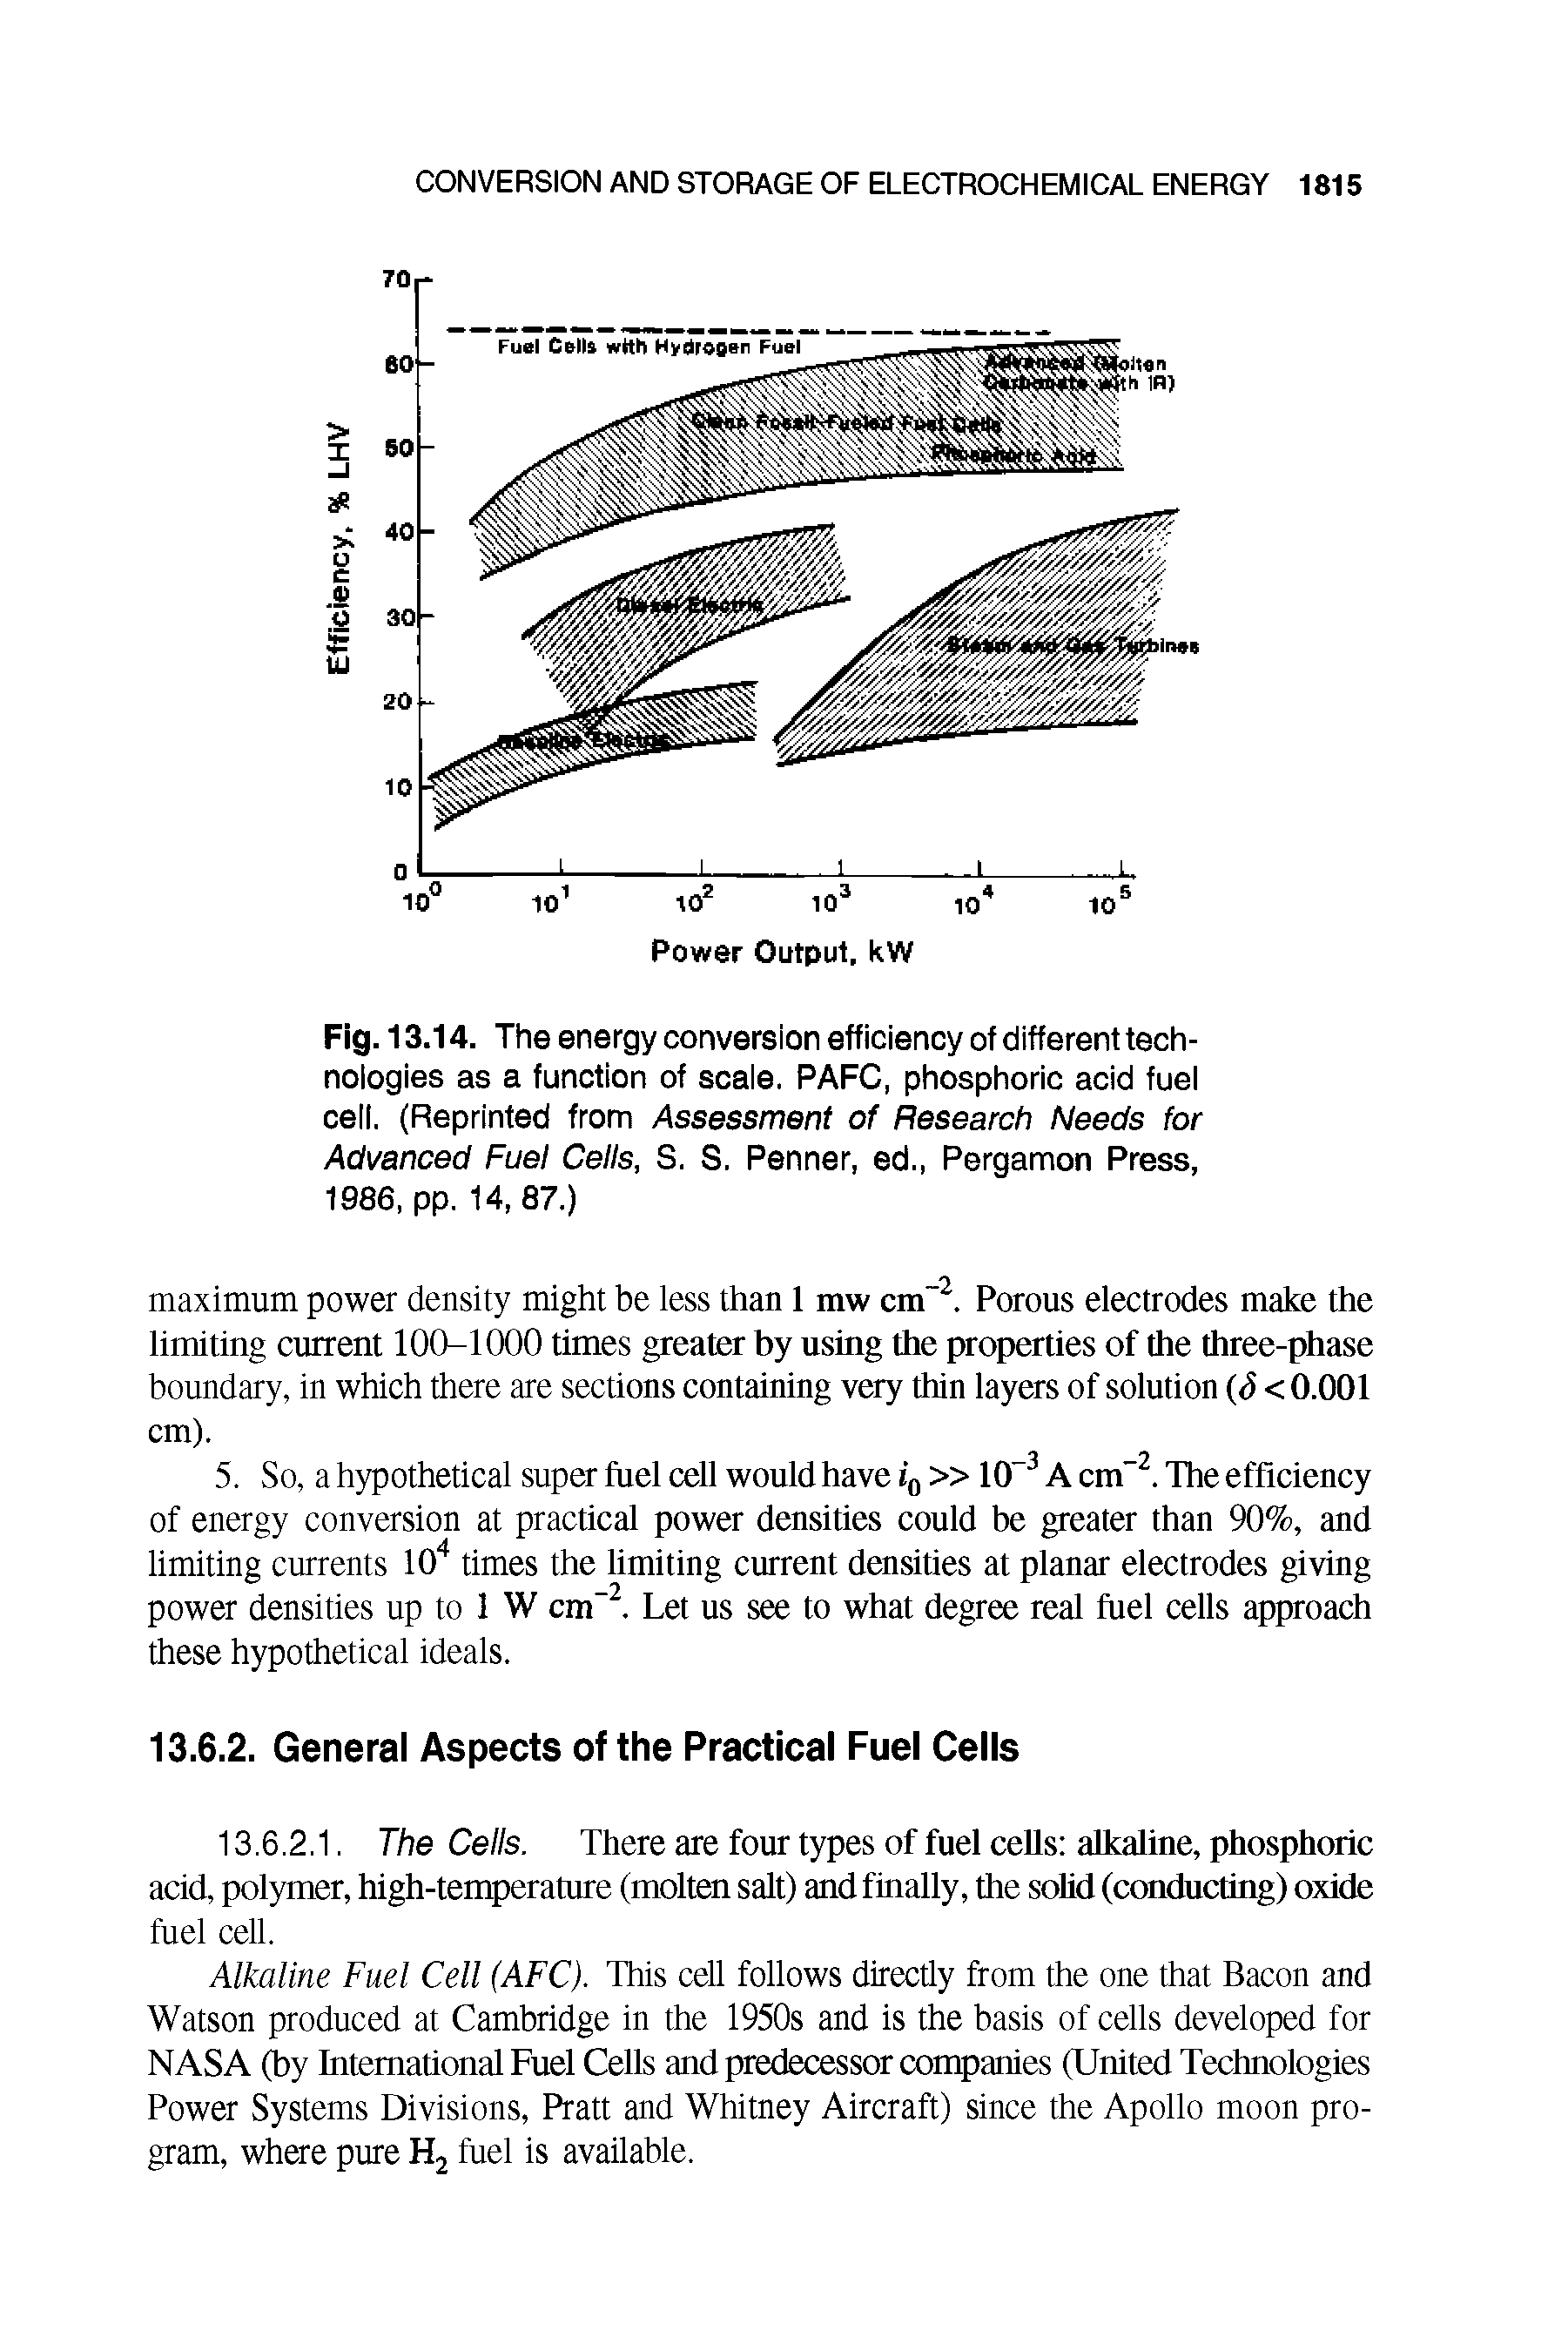 Fig. 13.14. The energy conversion efficiency of different technologies as a function of scale. PAFC, phosphoric acid fuel cell. (Reprinted from Assessment of Research Needs for Advanced Fuel Cells, S. S. Penner, ed., Pergamon Press,...